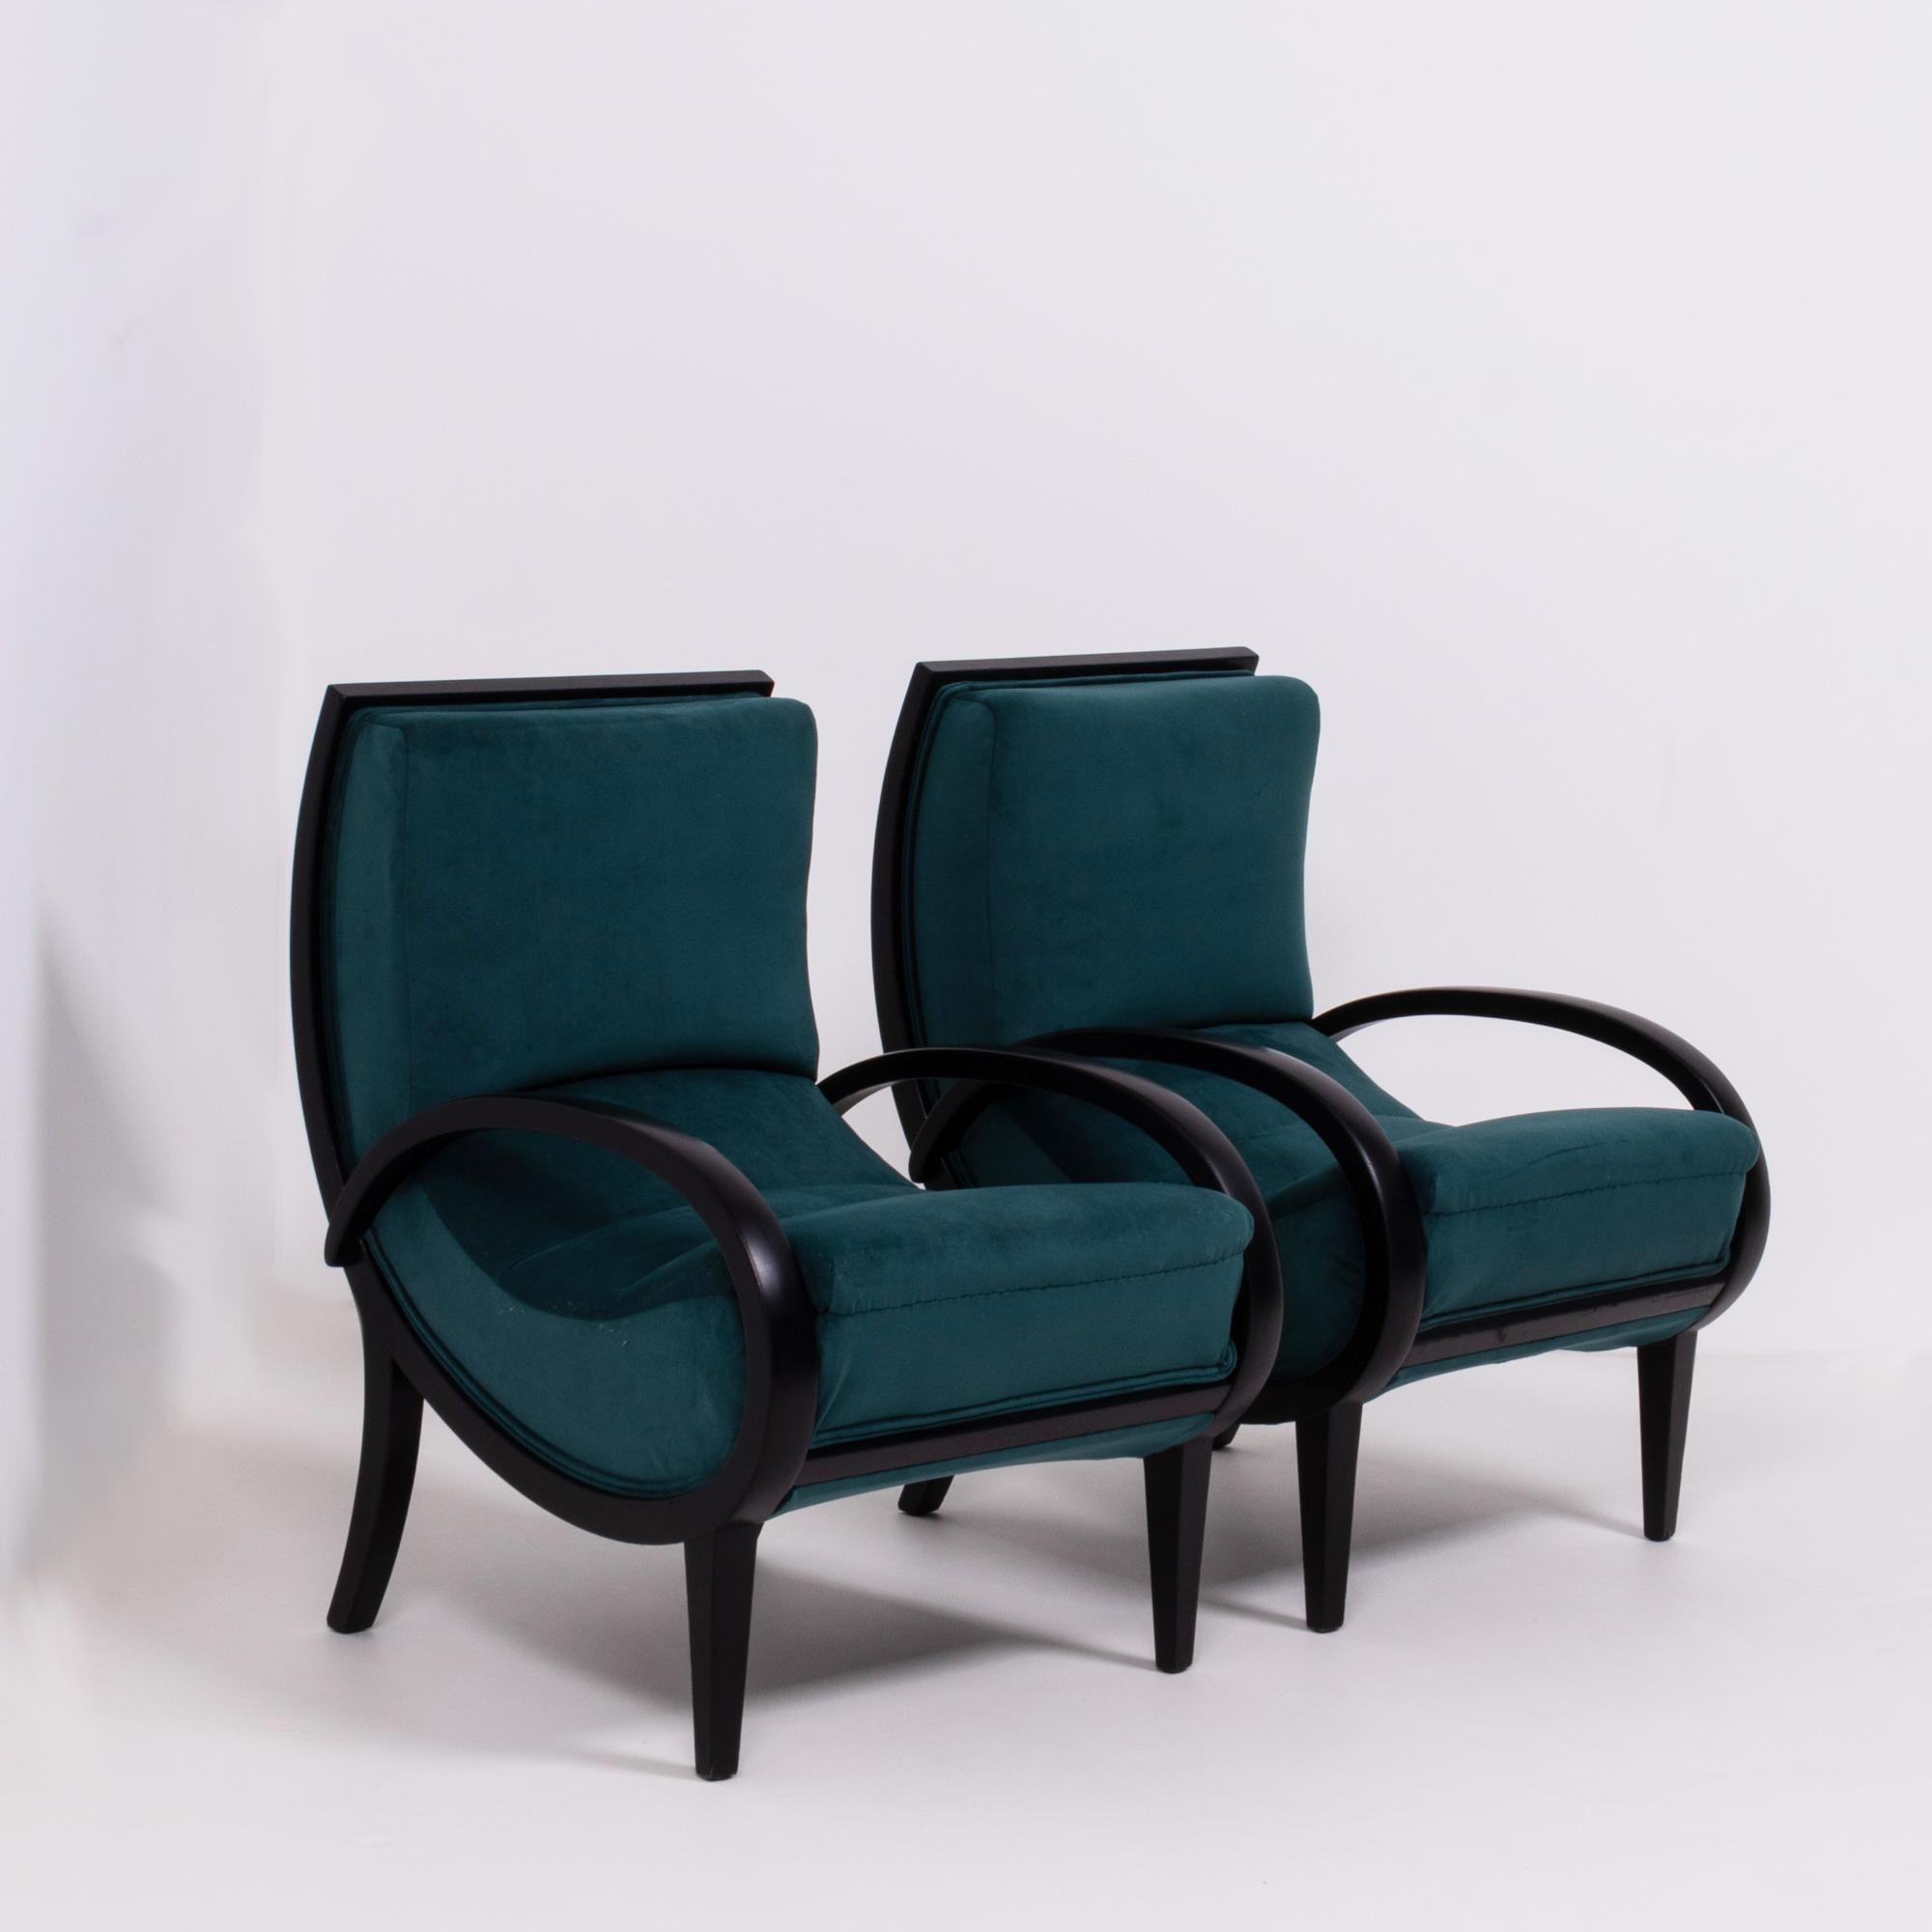 Early 20th Century Art Deco Teal Velvet and Bentwood Armchairs, 1920s, Set of 2